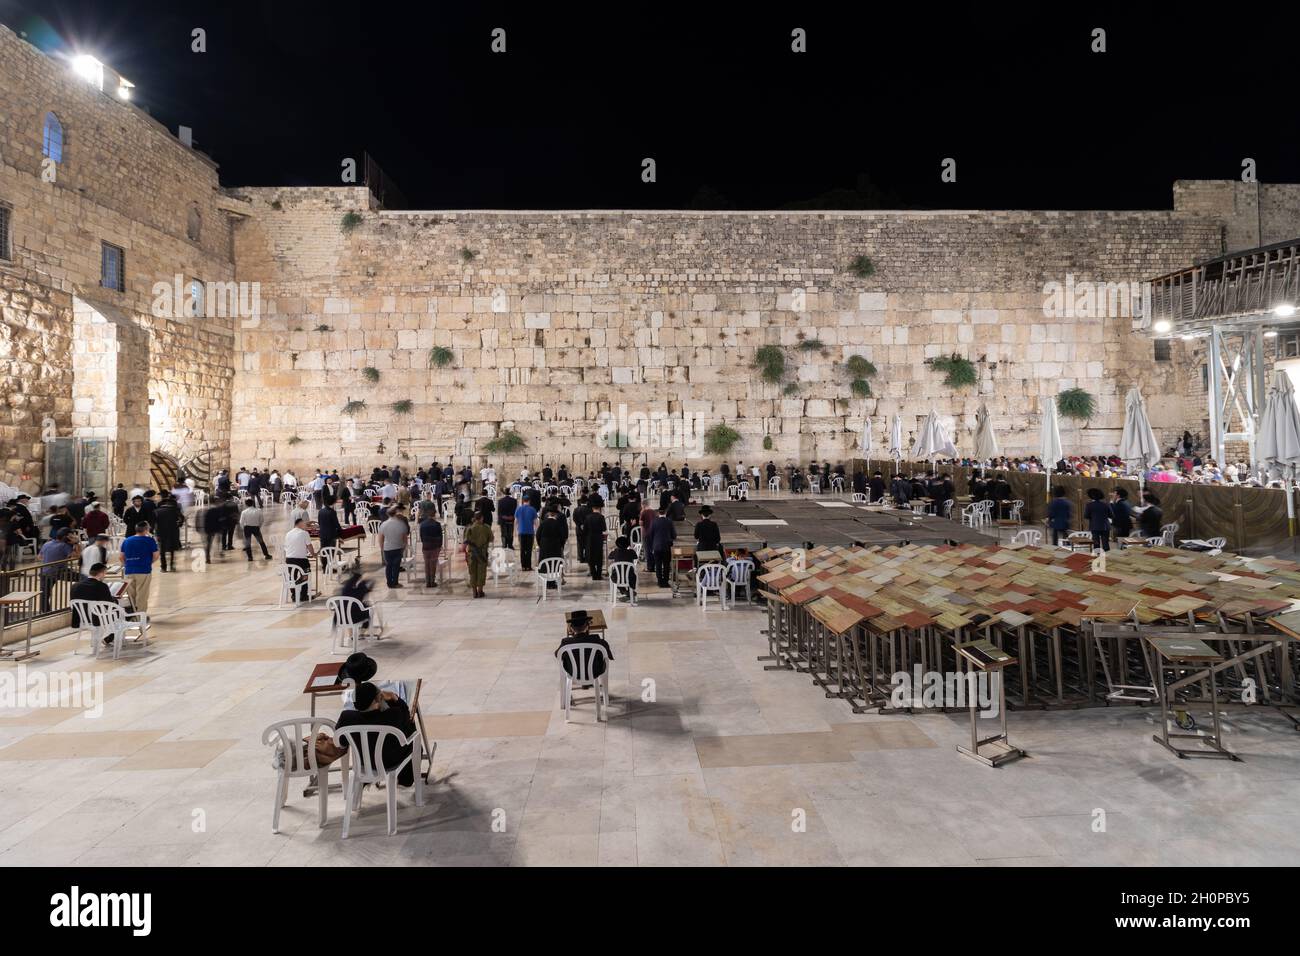 jerusalem-israel, 06-07-2021. Long exposure in the men's plaza at the Western Wall in Jerusalem, at night Stock Photo